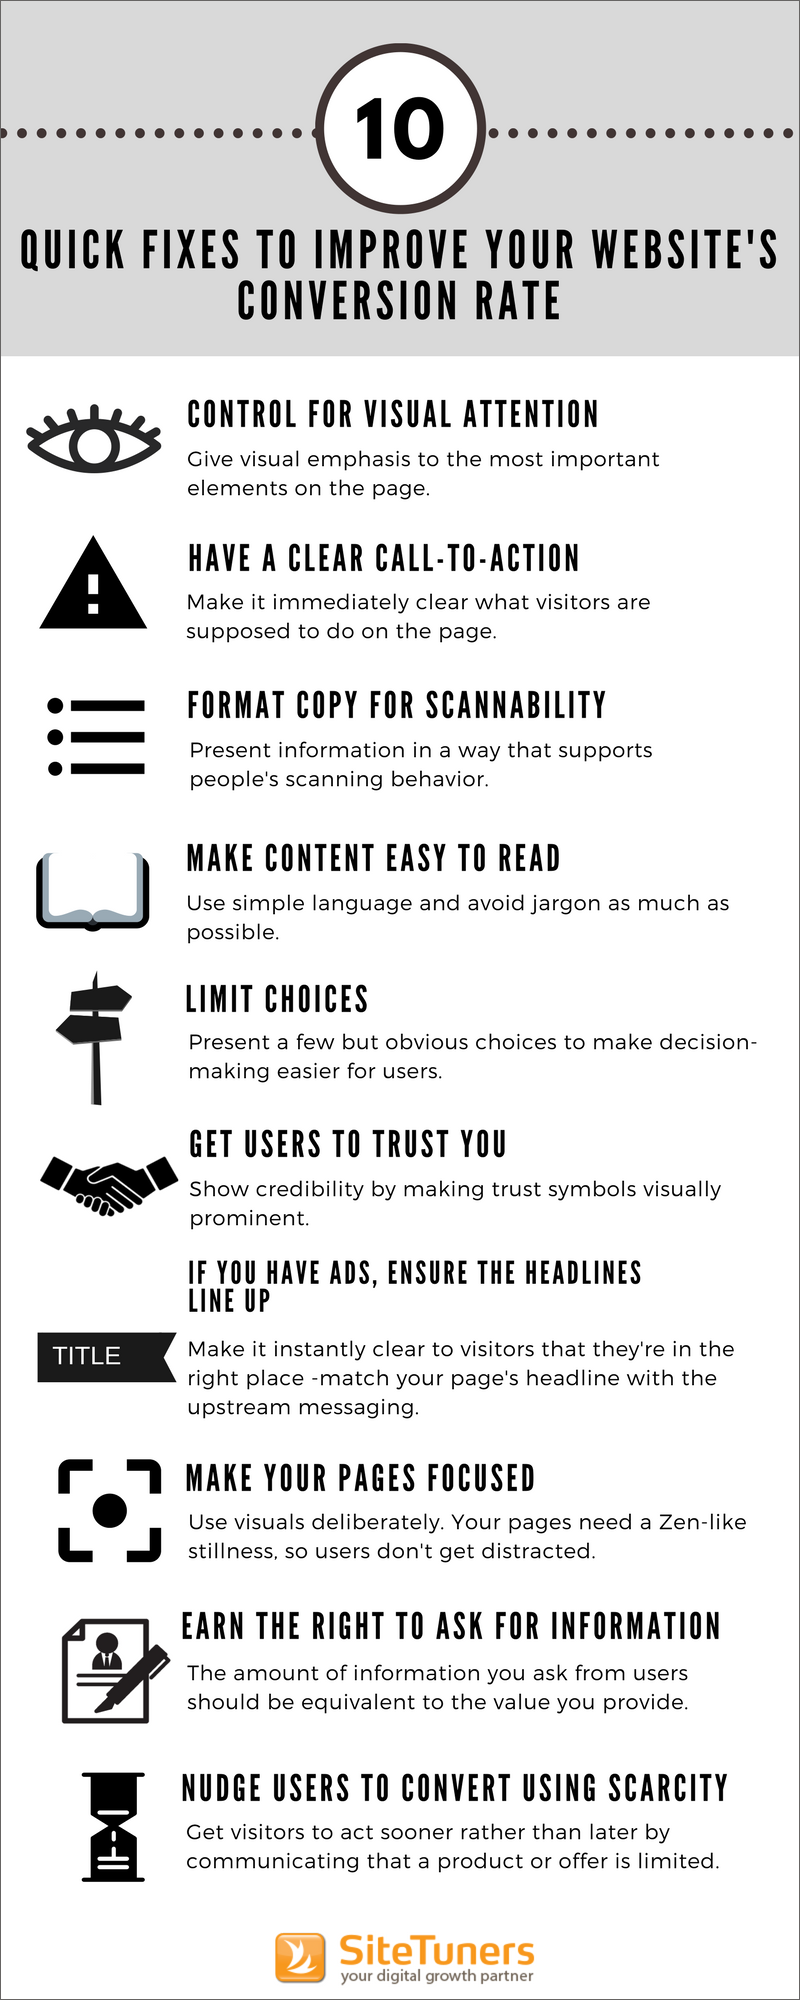 10 Quick Fixes to Improve Your Website's Conversion Rate Infographic